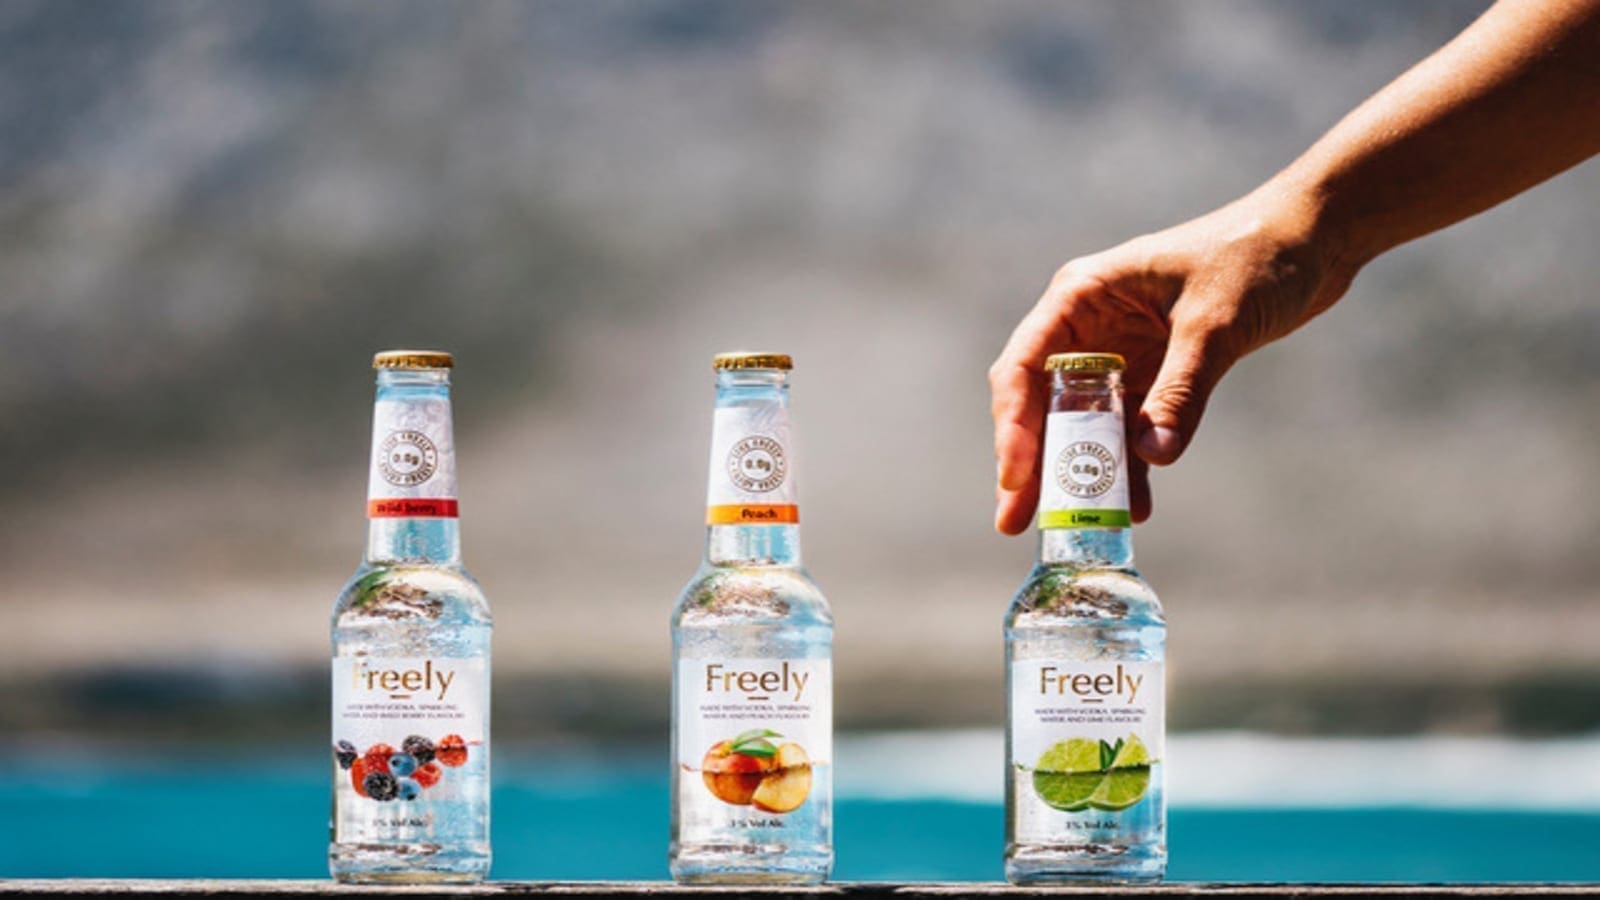 South Africa’s Natures Own Beverages heightens frequency on hard seltzer buzz, launching Freely